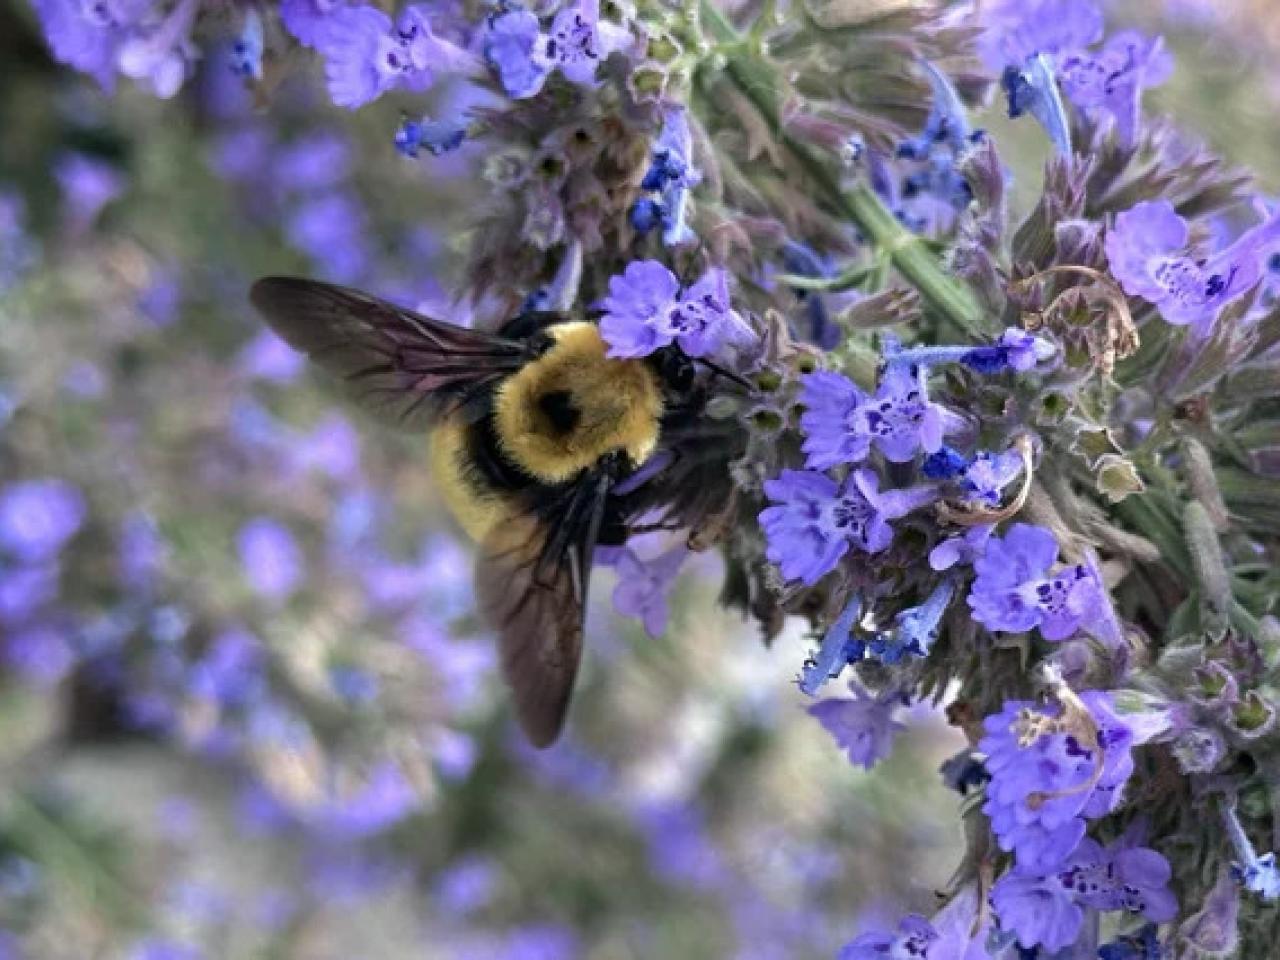 A bee on a plant with small purple flowers.